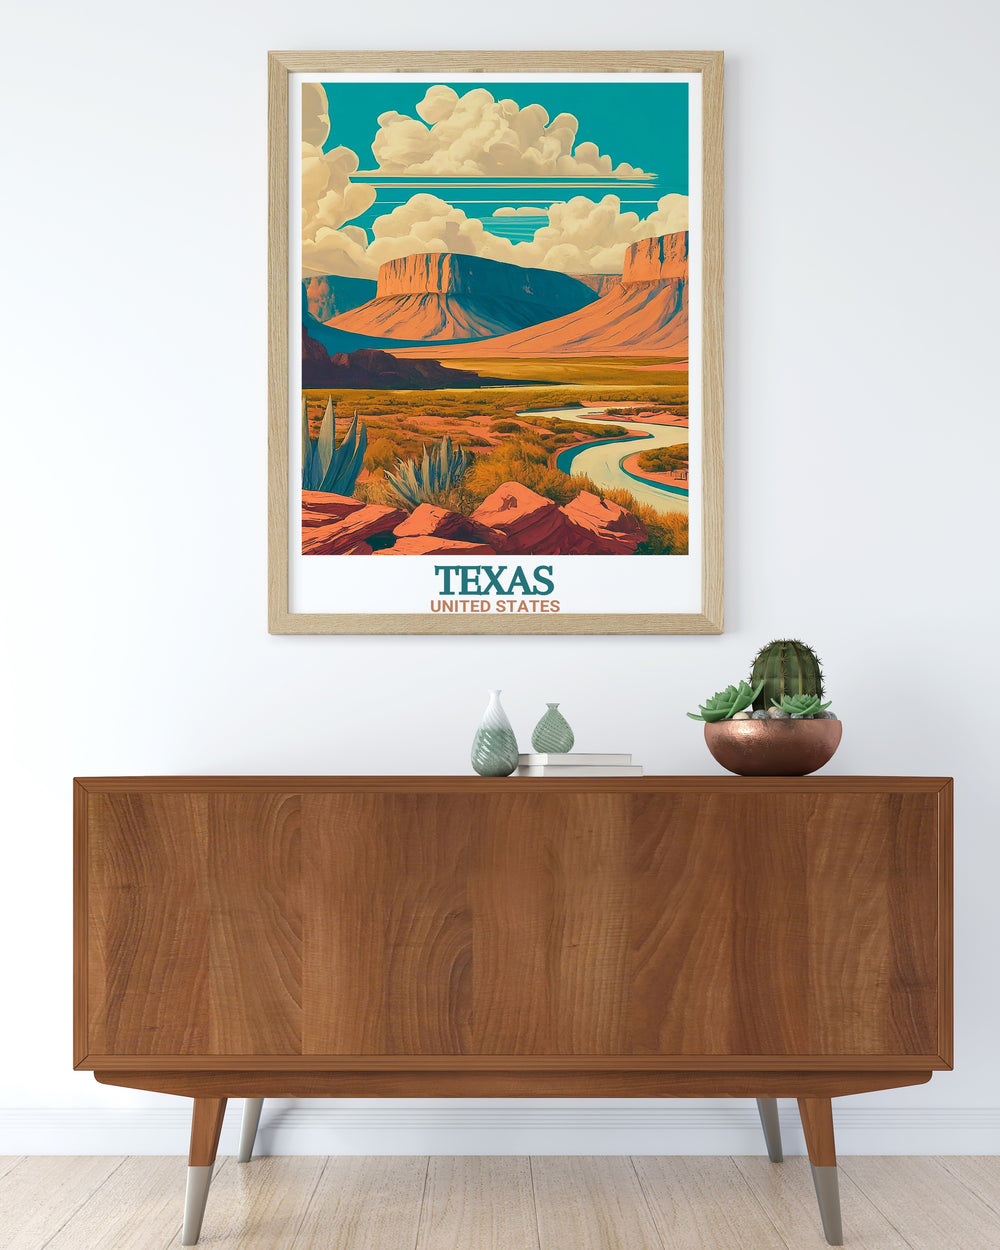 Vintage Travel Print of Guadalupe Mountains National Park. El Capitan Texas and Guadalupe Peak are prominently displayed. Enhance your space with the stunning artwork from Big Bend National Park.